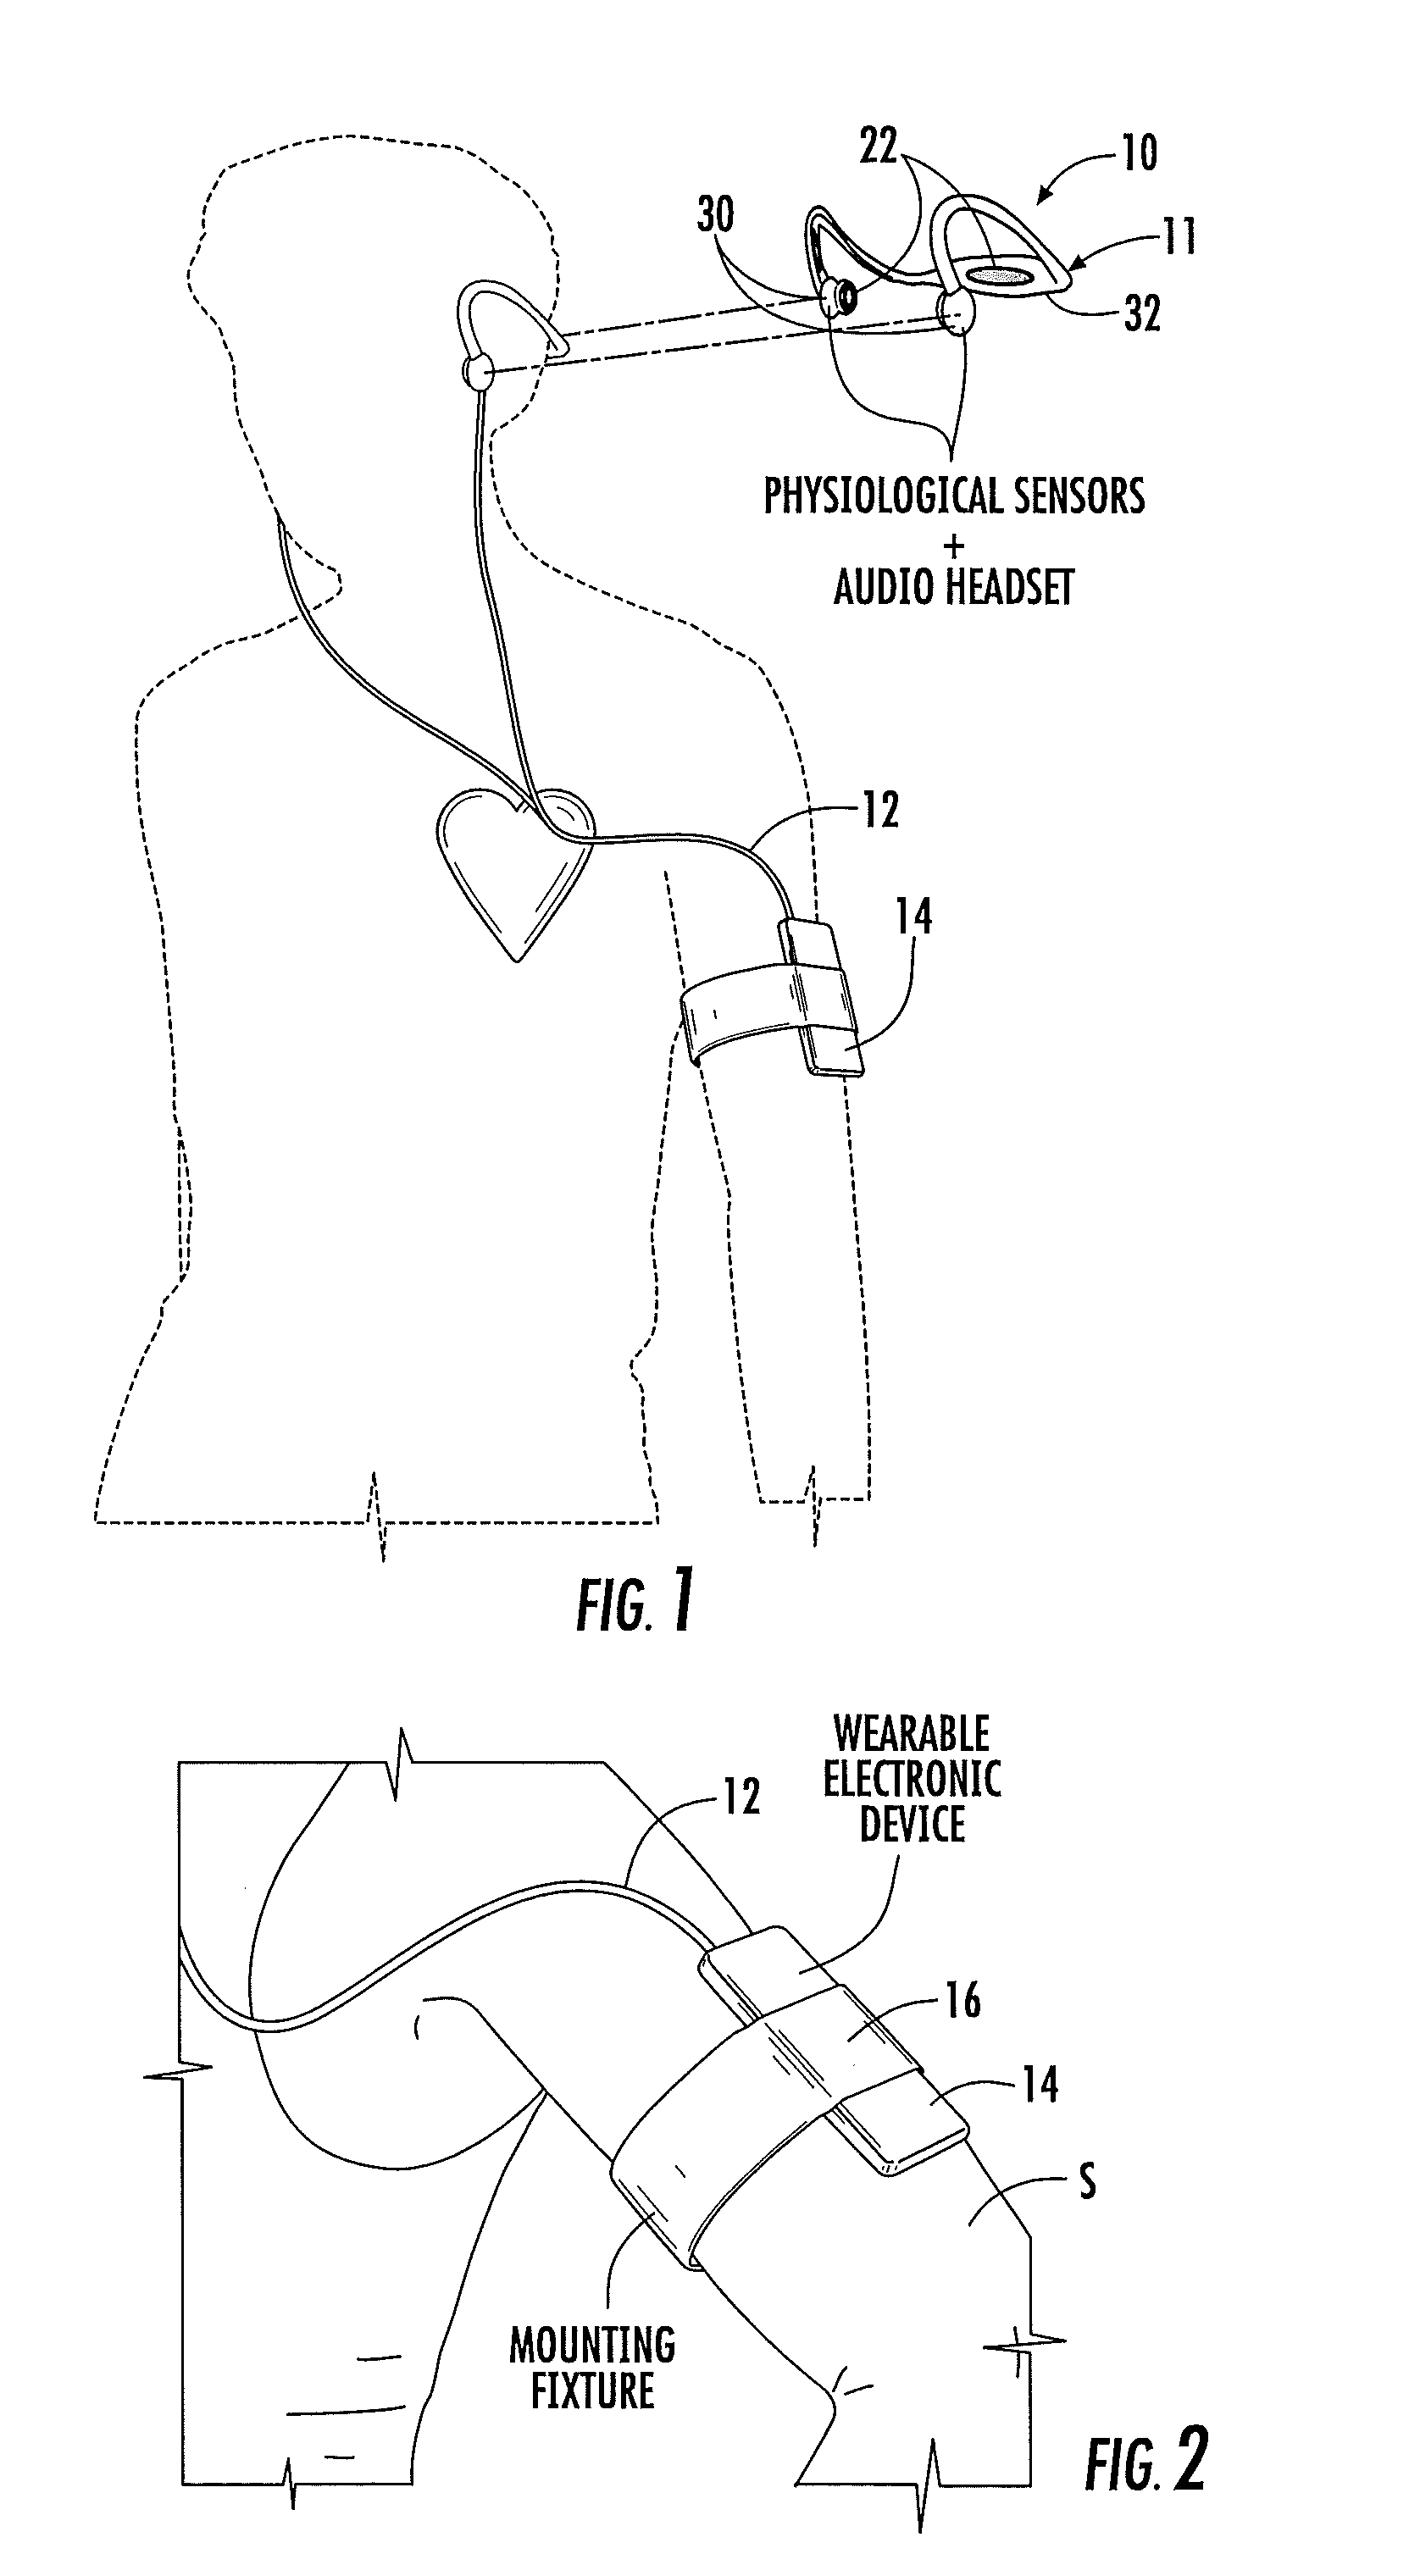 Methods and Apparatus for Measuring Physiological Conditions